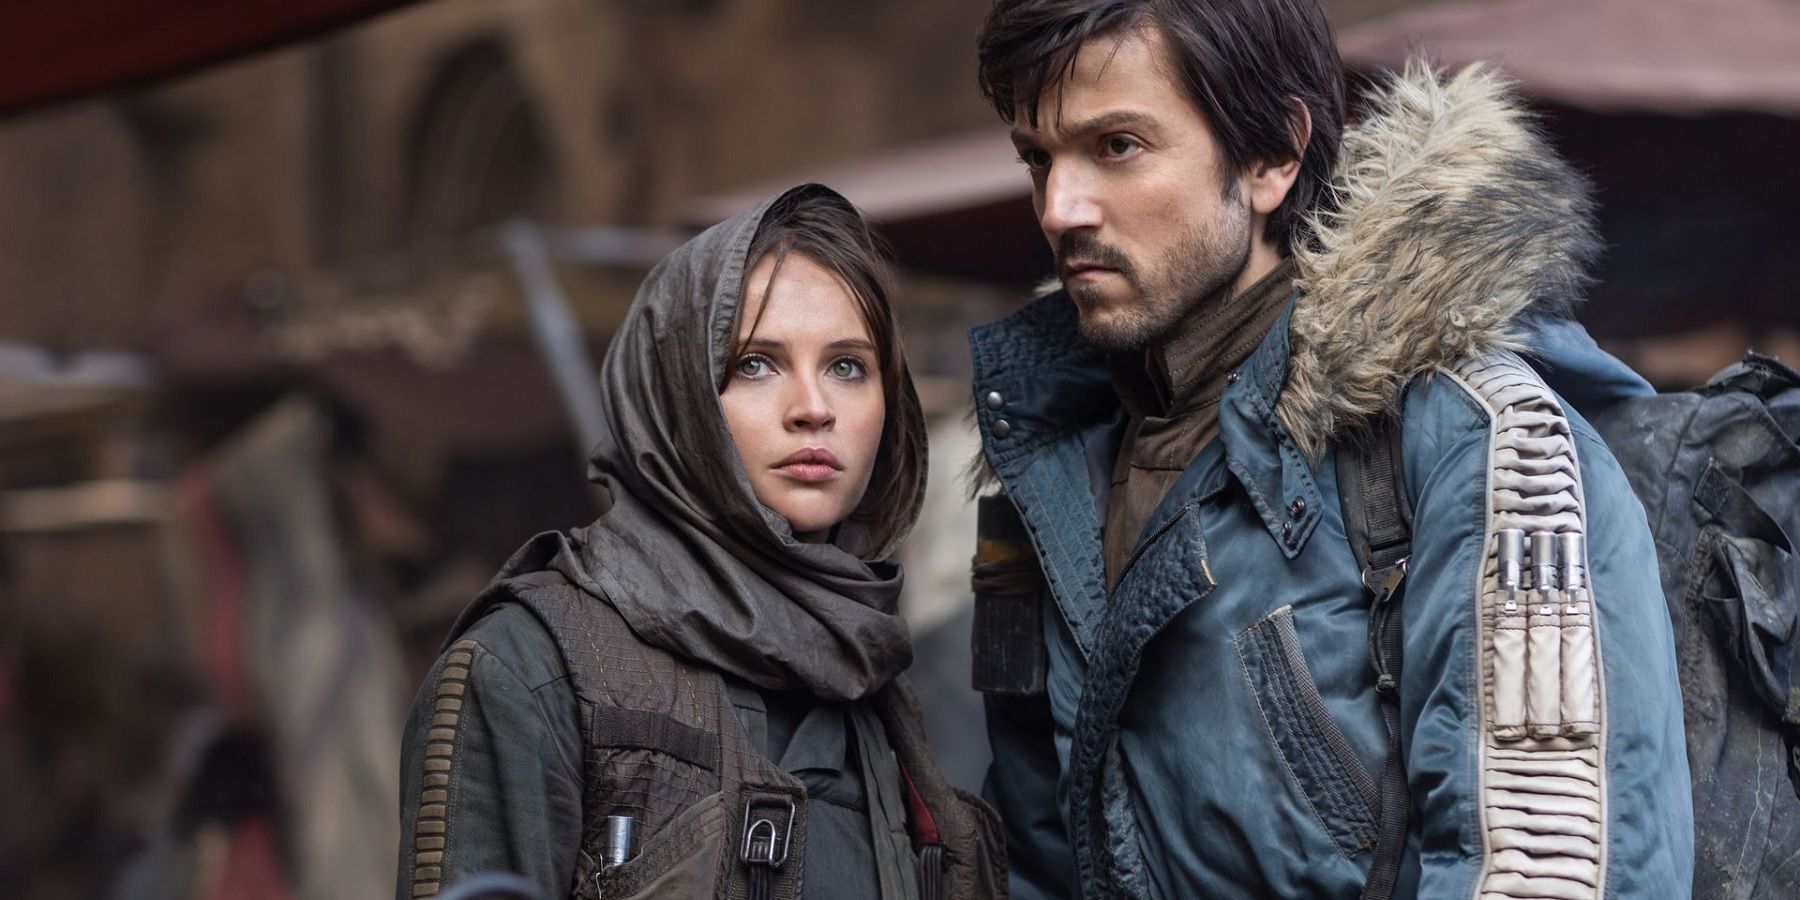 Star Wars Rogue One - Jyn and Cassian